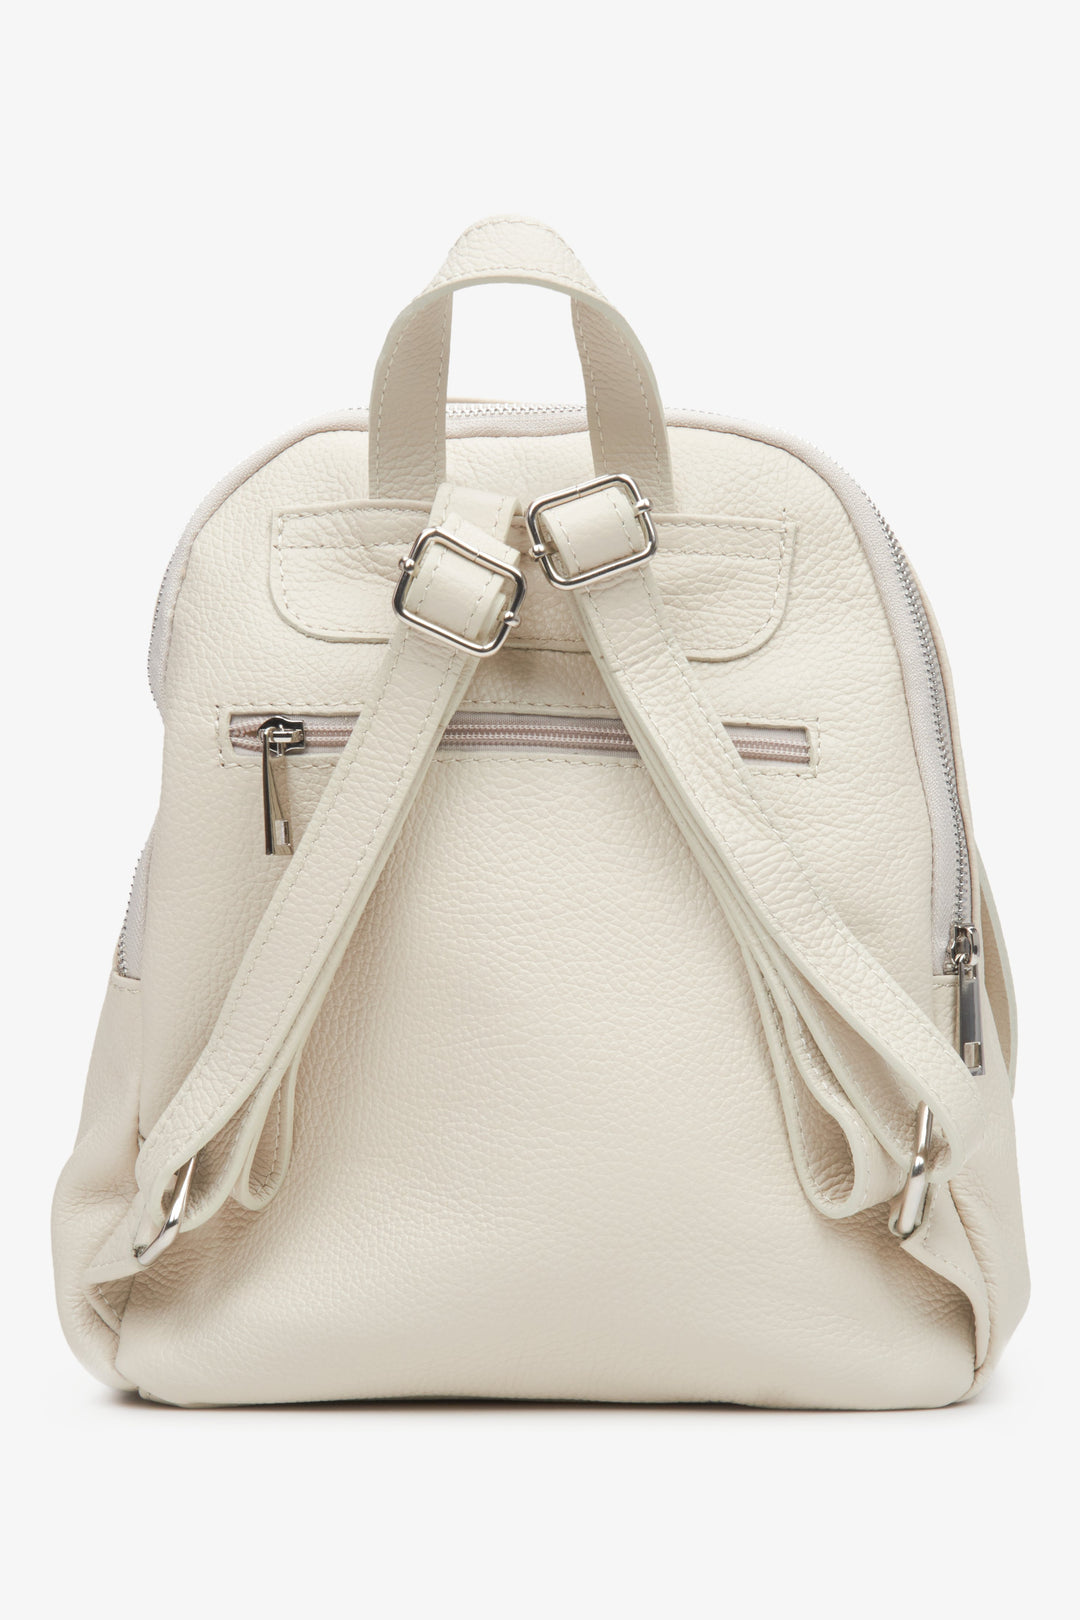 Women's Light Beige Leather Backpack with silver accents - reverse.